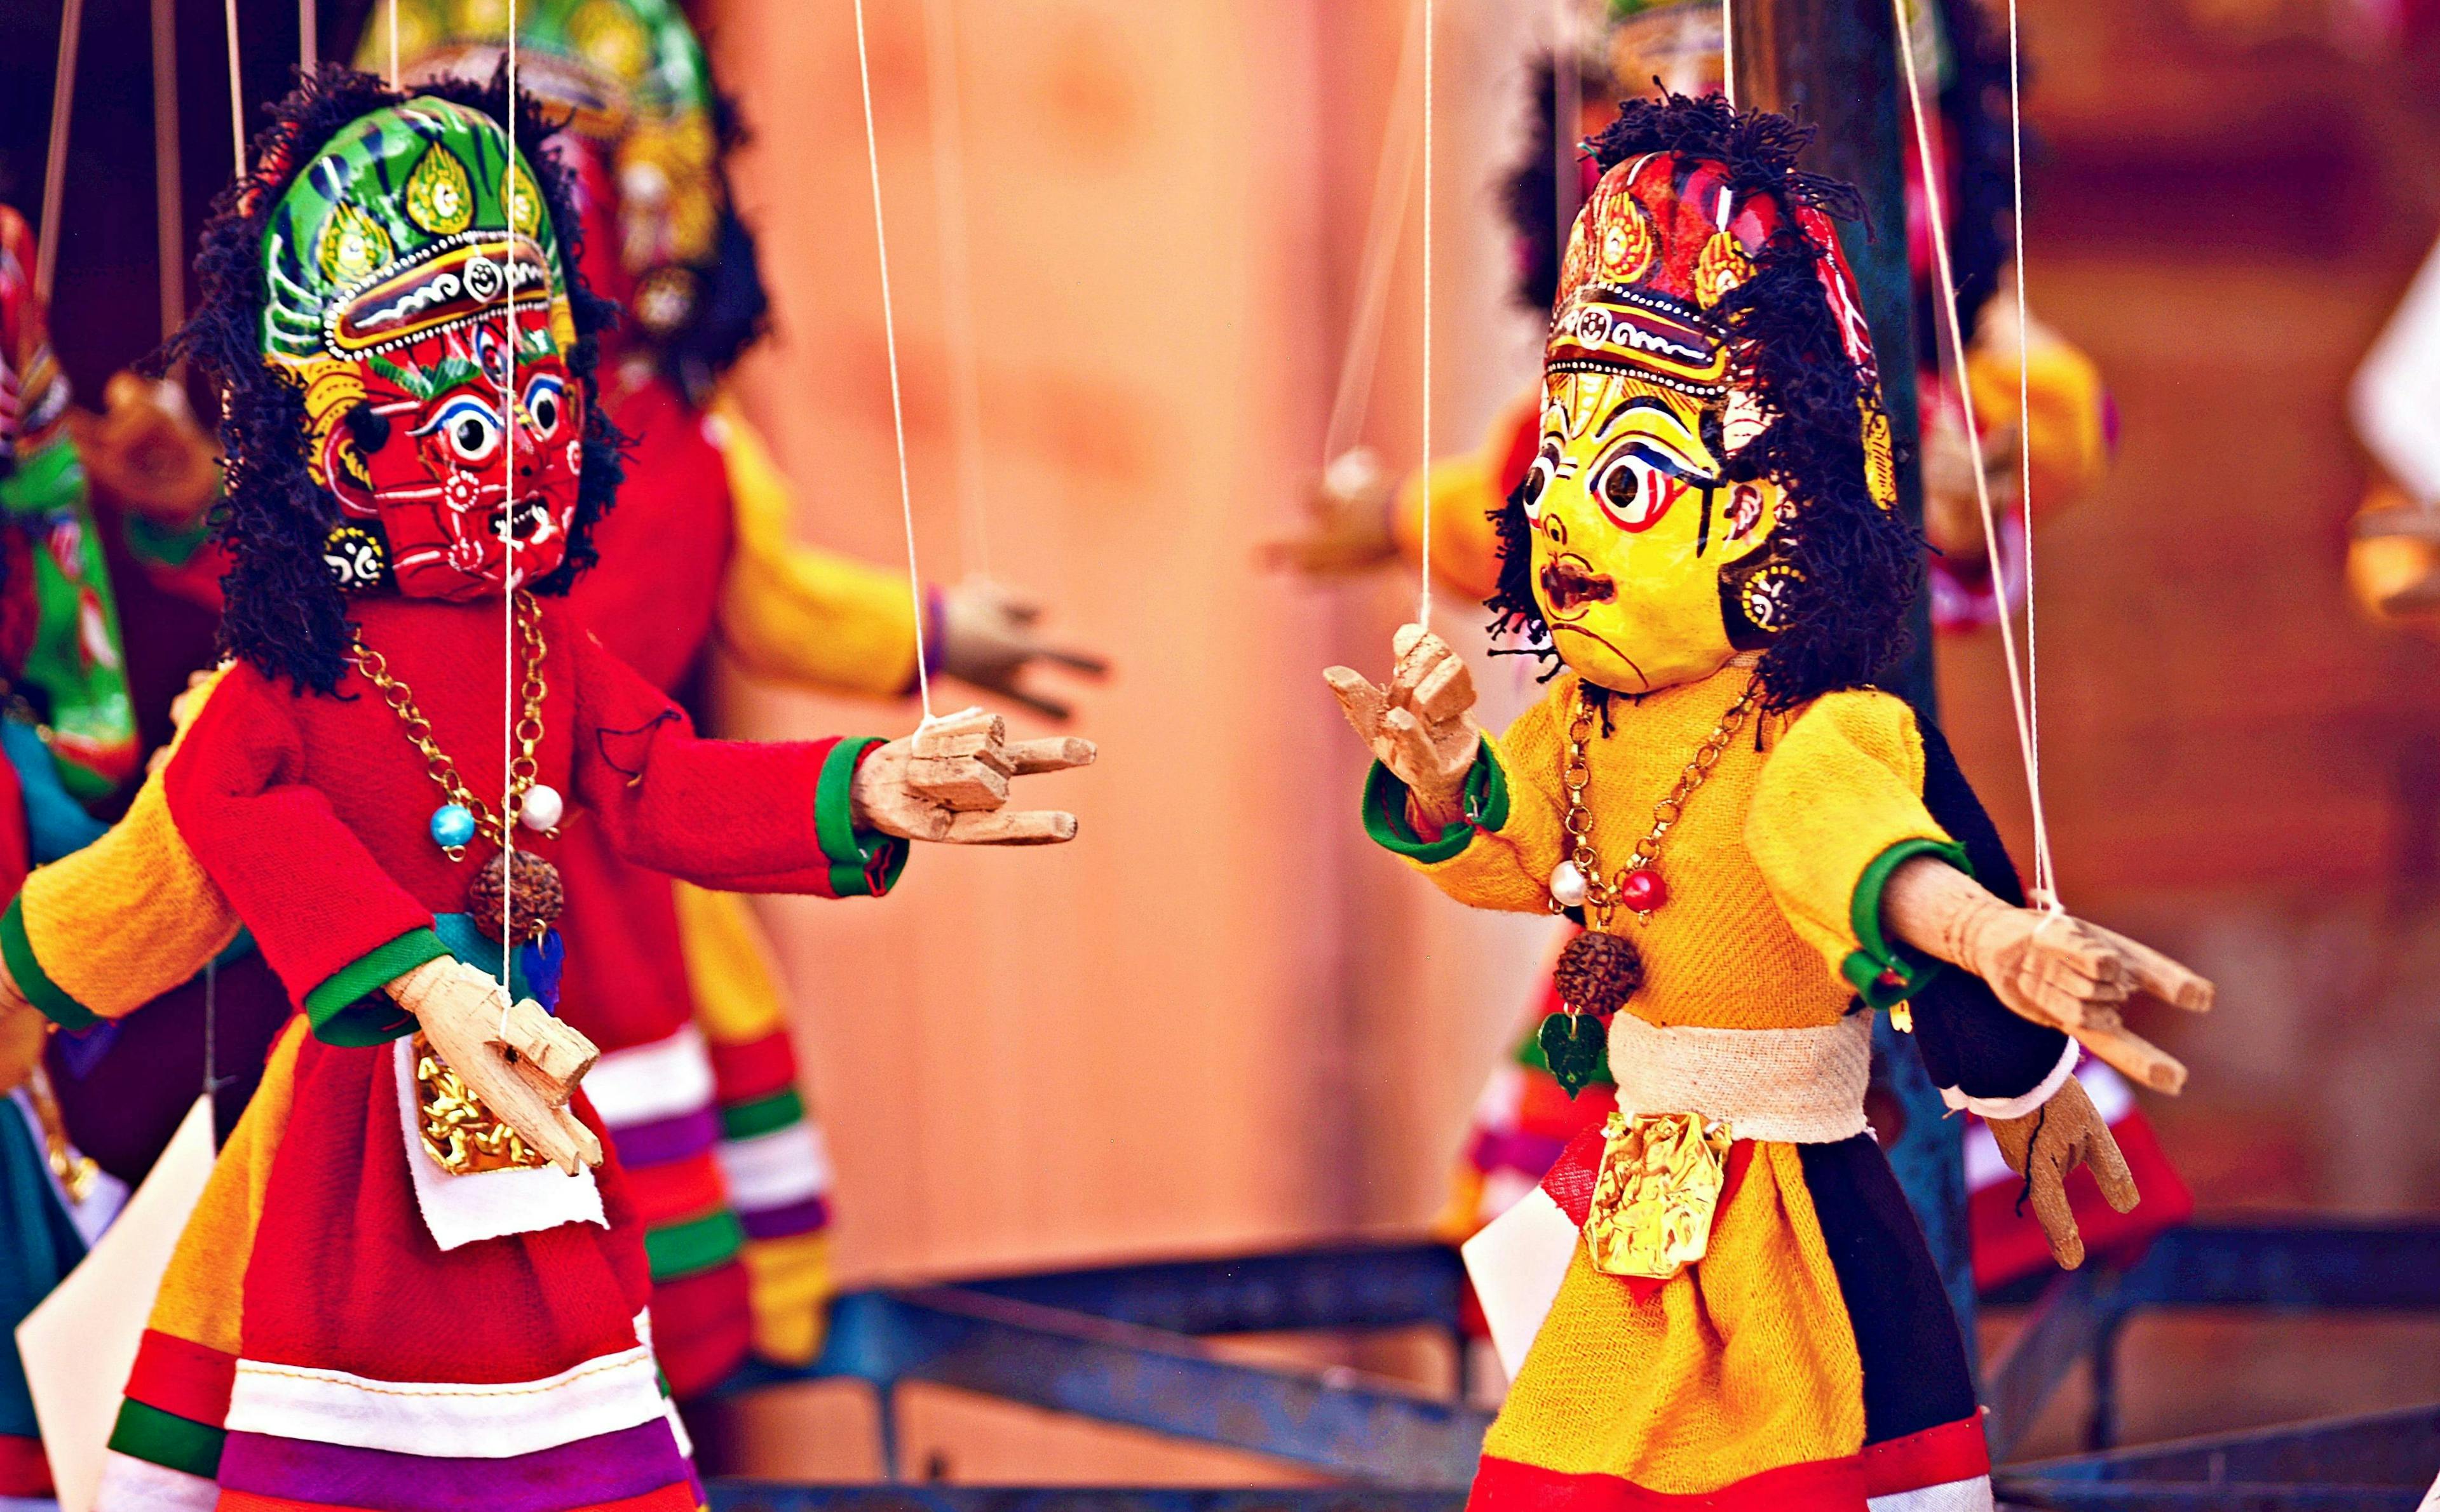 Colorful traditional puppets with intricate face paint and elaborate costumes, suspended by strings, appear to be engaging in a dynamic performance. The background is softly blurred, highlighting the puppets.